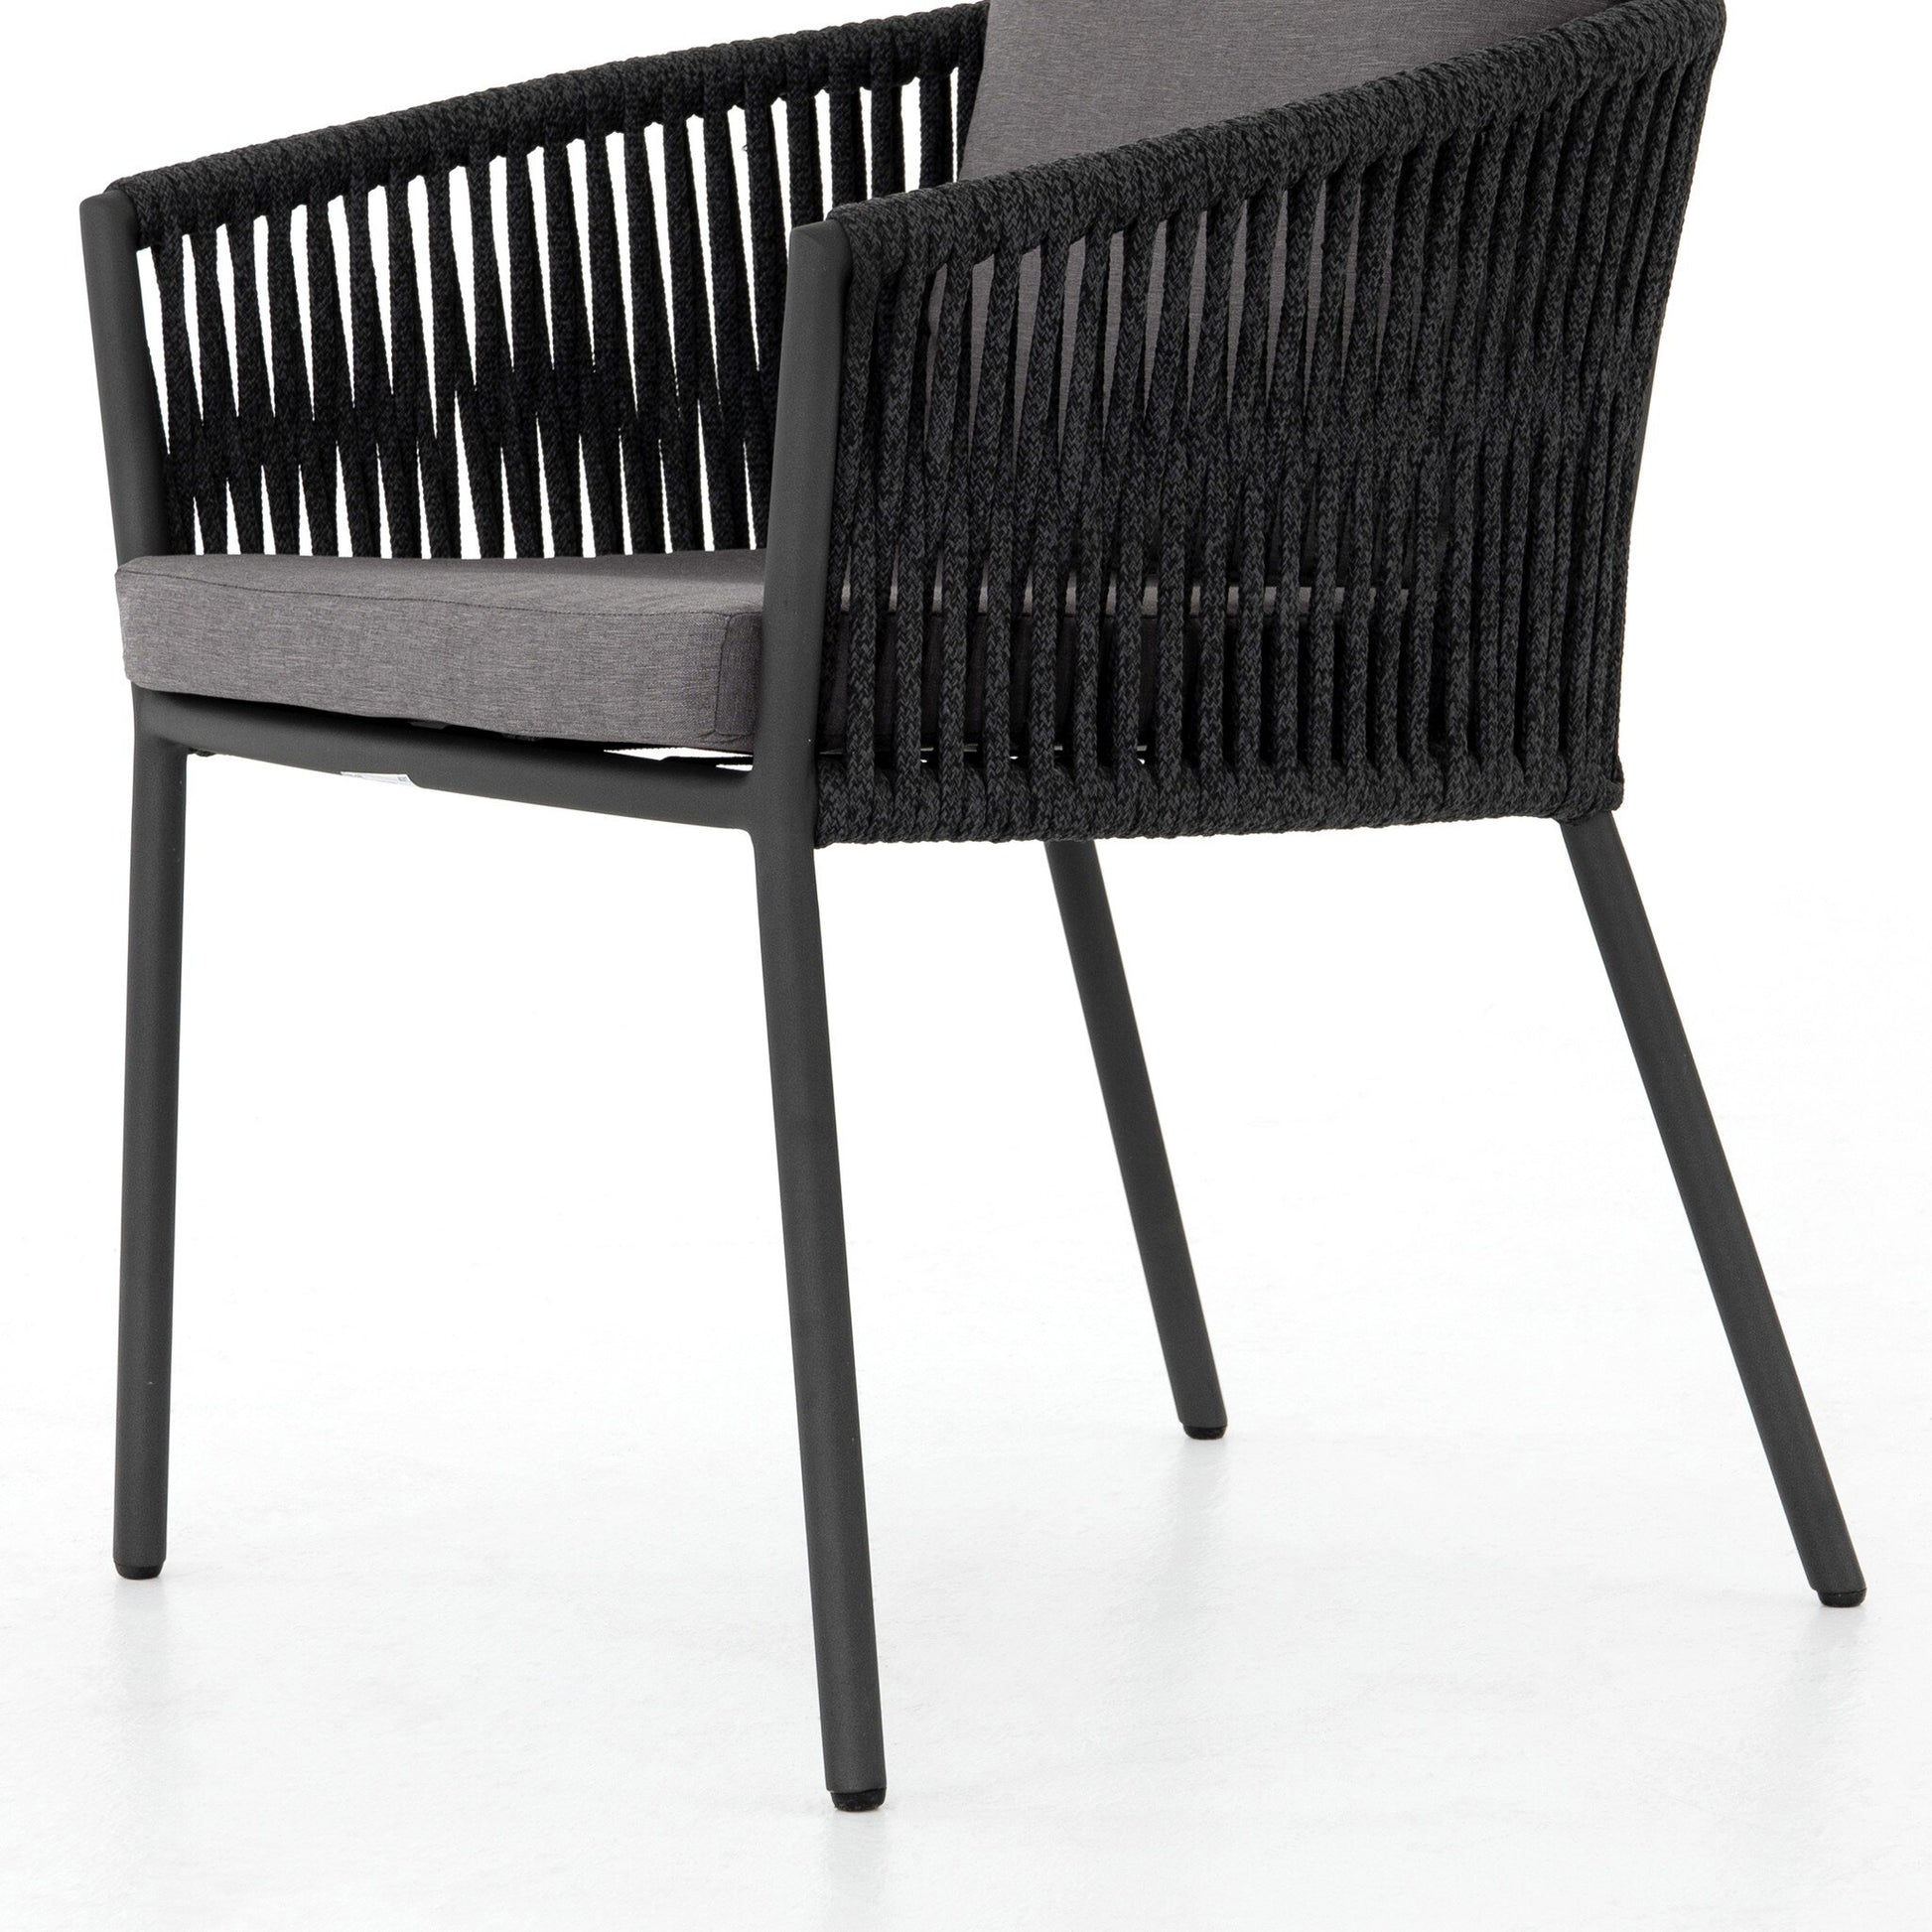 Ledger Outdoor Dining Chair